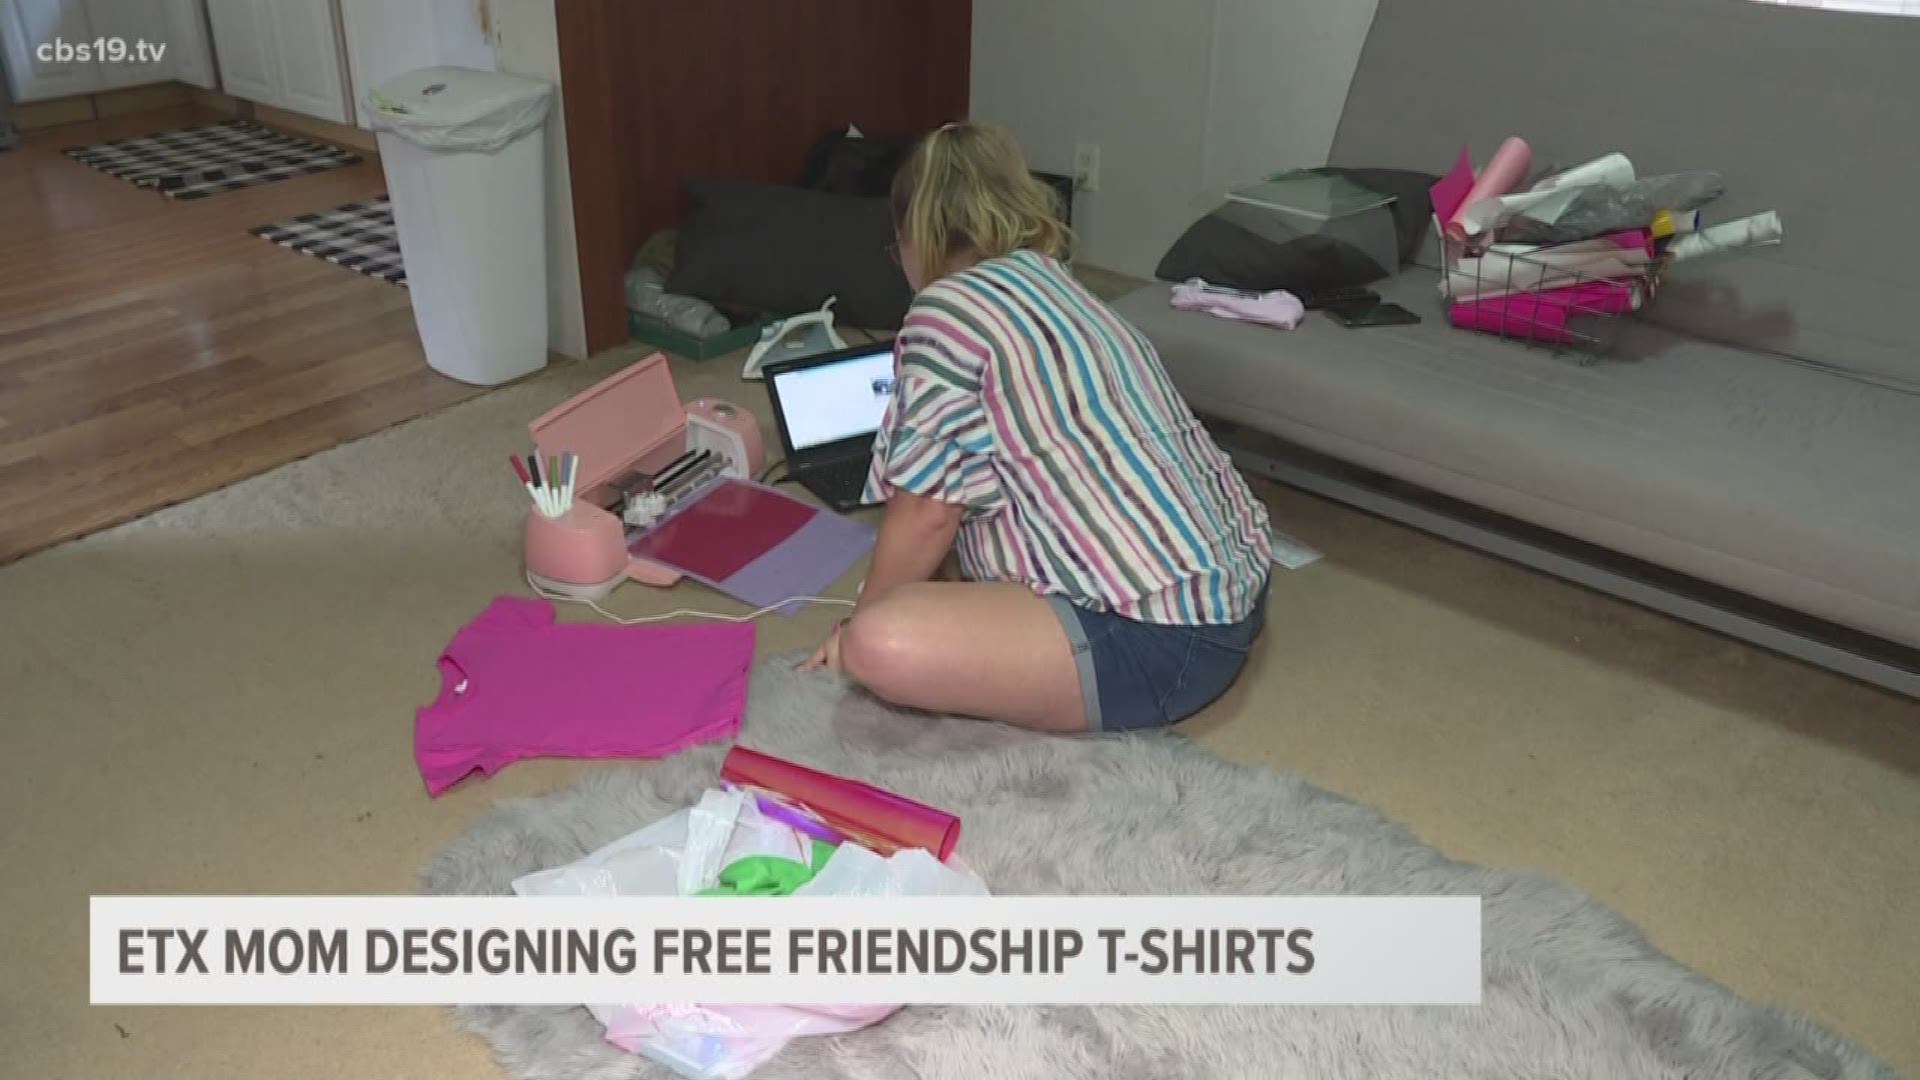 After seeing a viral post of a boy wearing an "I'll be your friend" shirt, an East Texas mom decided to make one for her daughter and others.